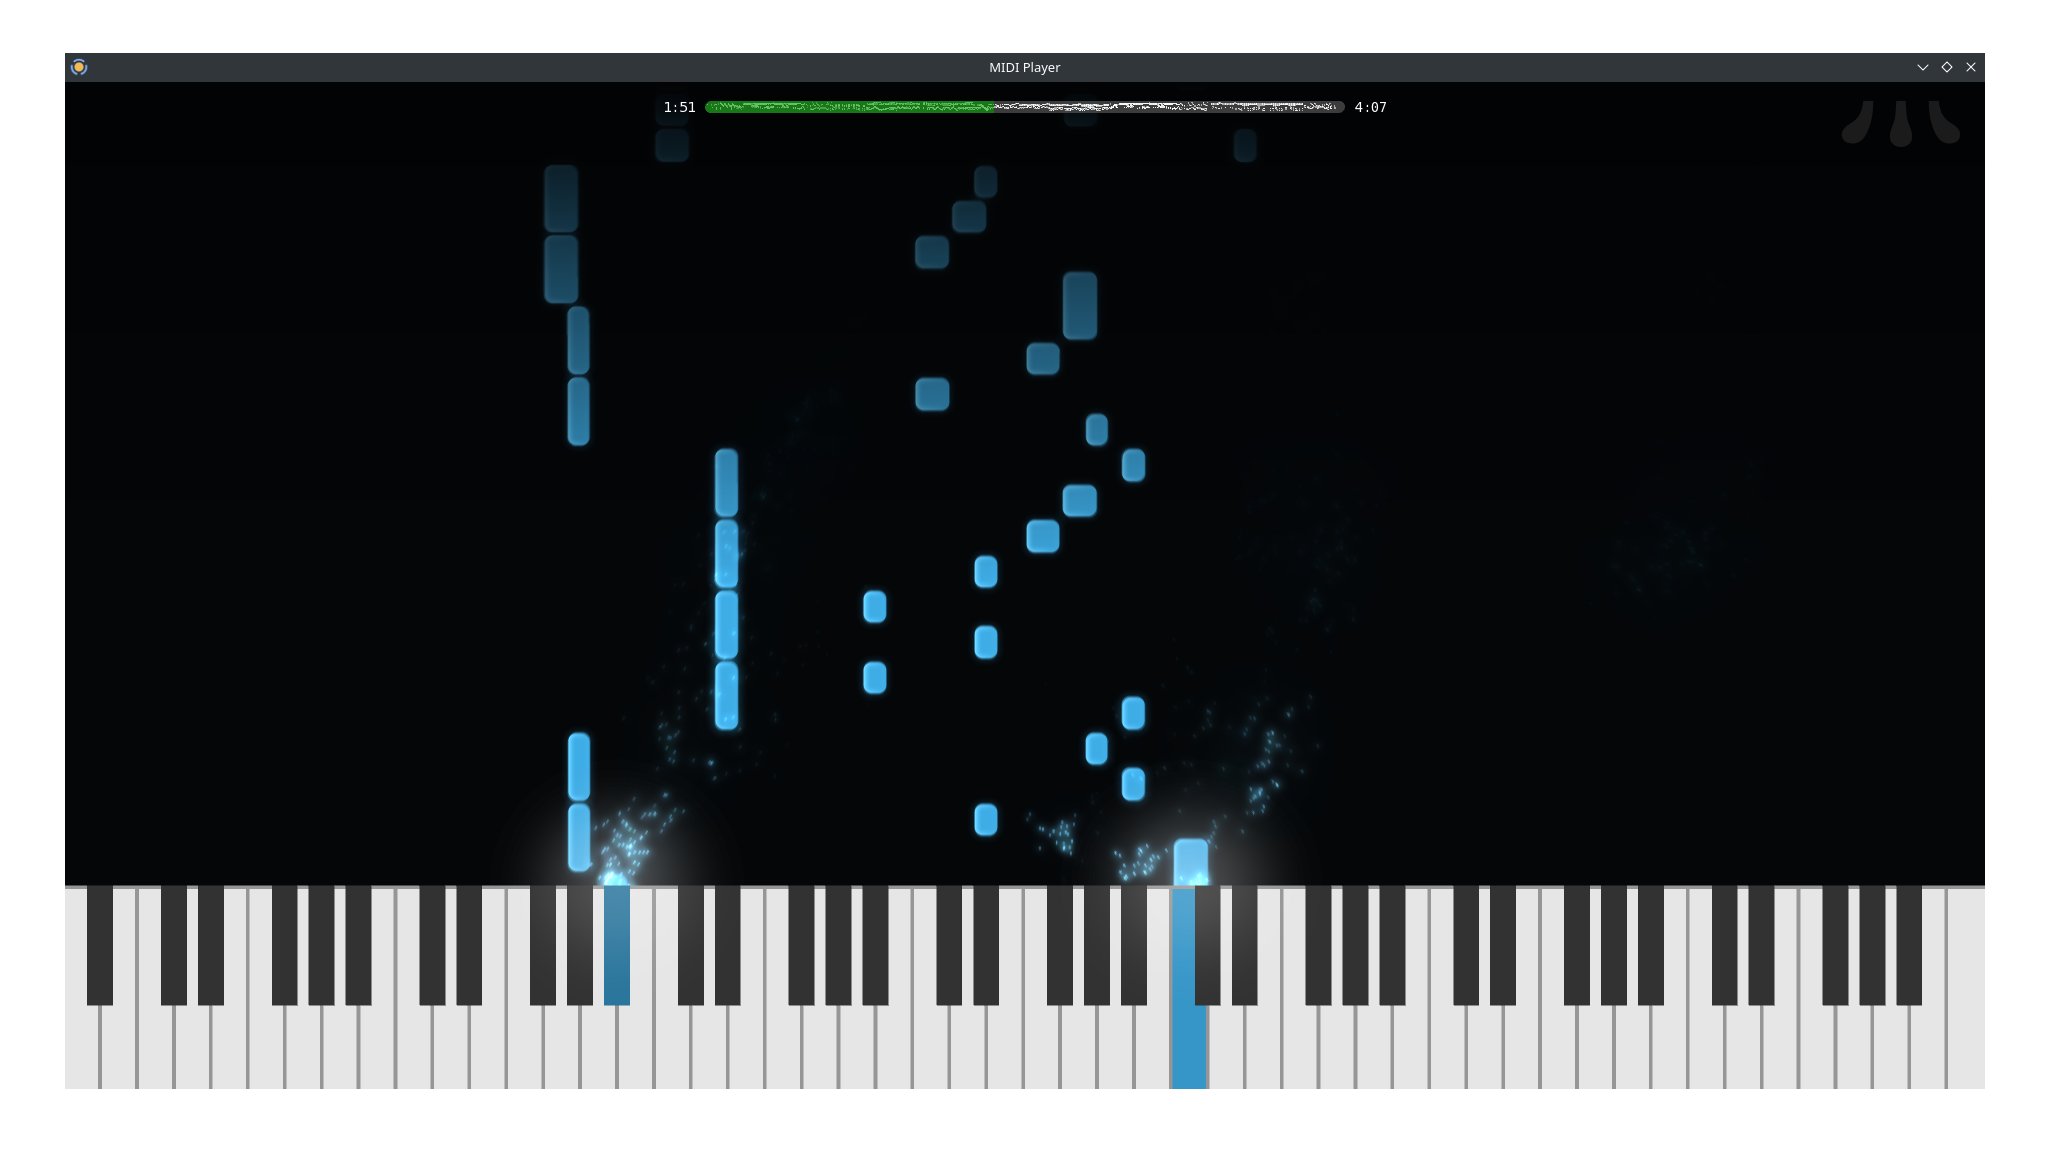 MIDI Player in playing mode, with yellow tiles